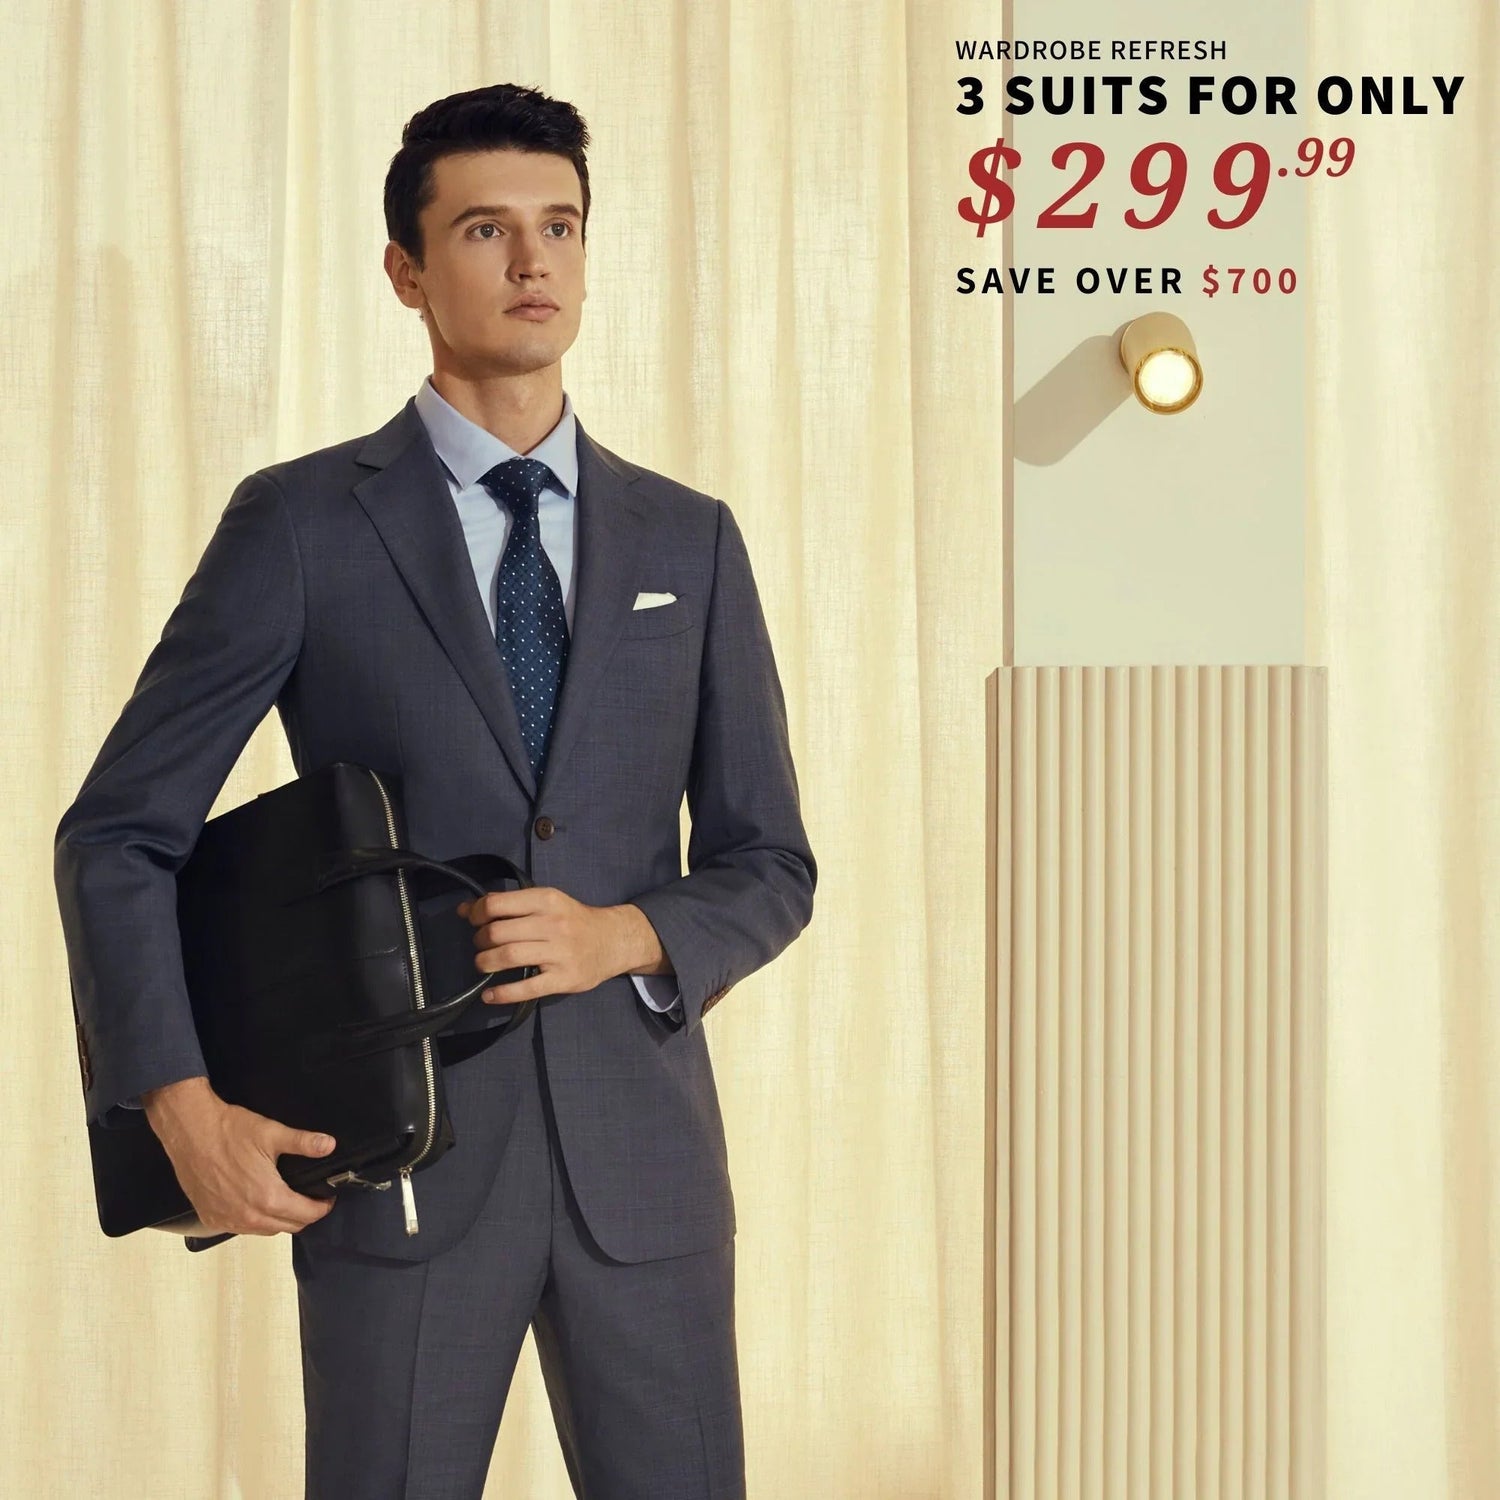 A man in a suit is holding a BYOB briefcase.